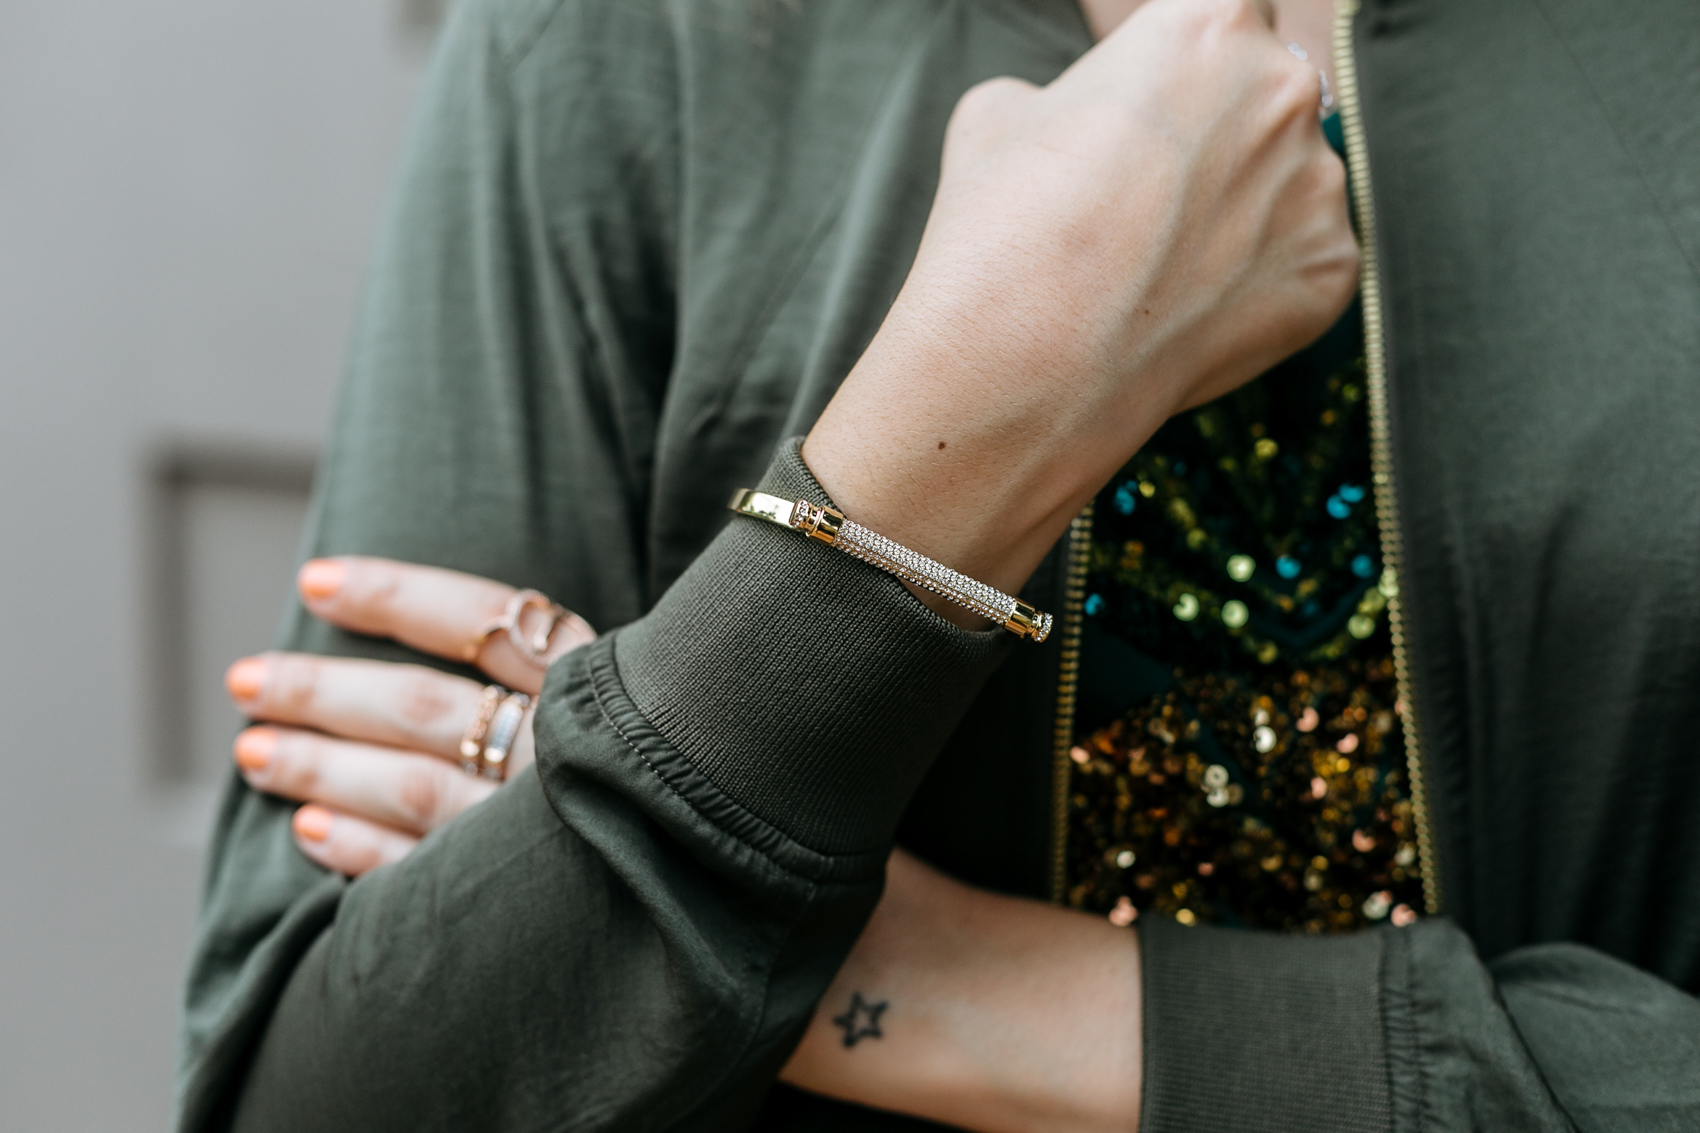 Swarovski bangle and rings, dainty star outline tattoo, army green satin bomber jacket and sequin t-shirt from H&M